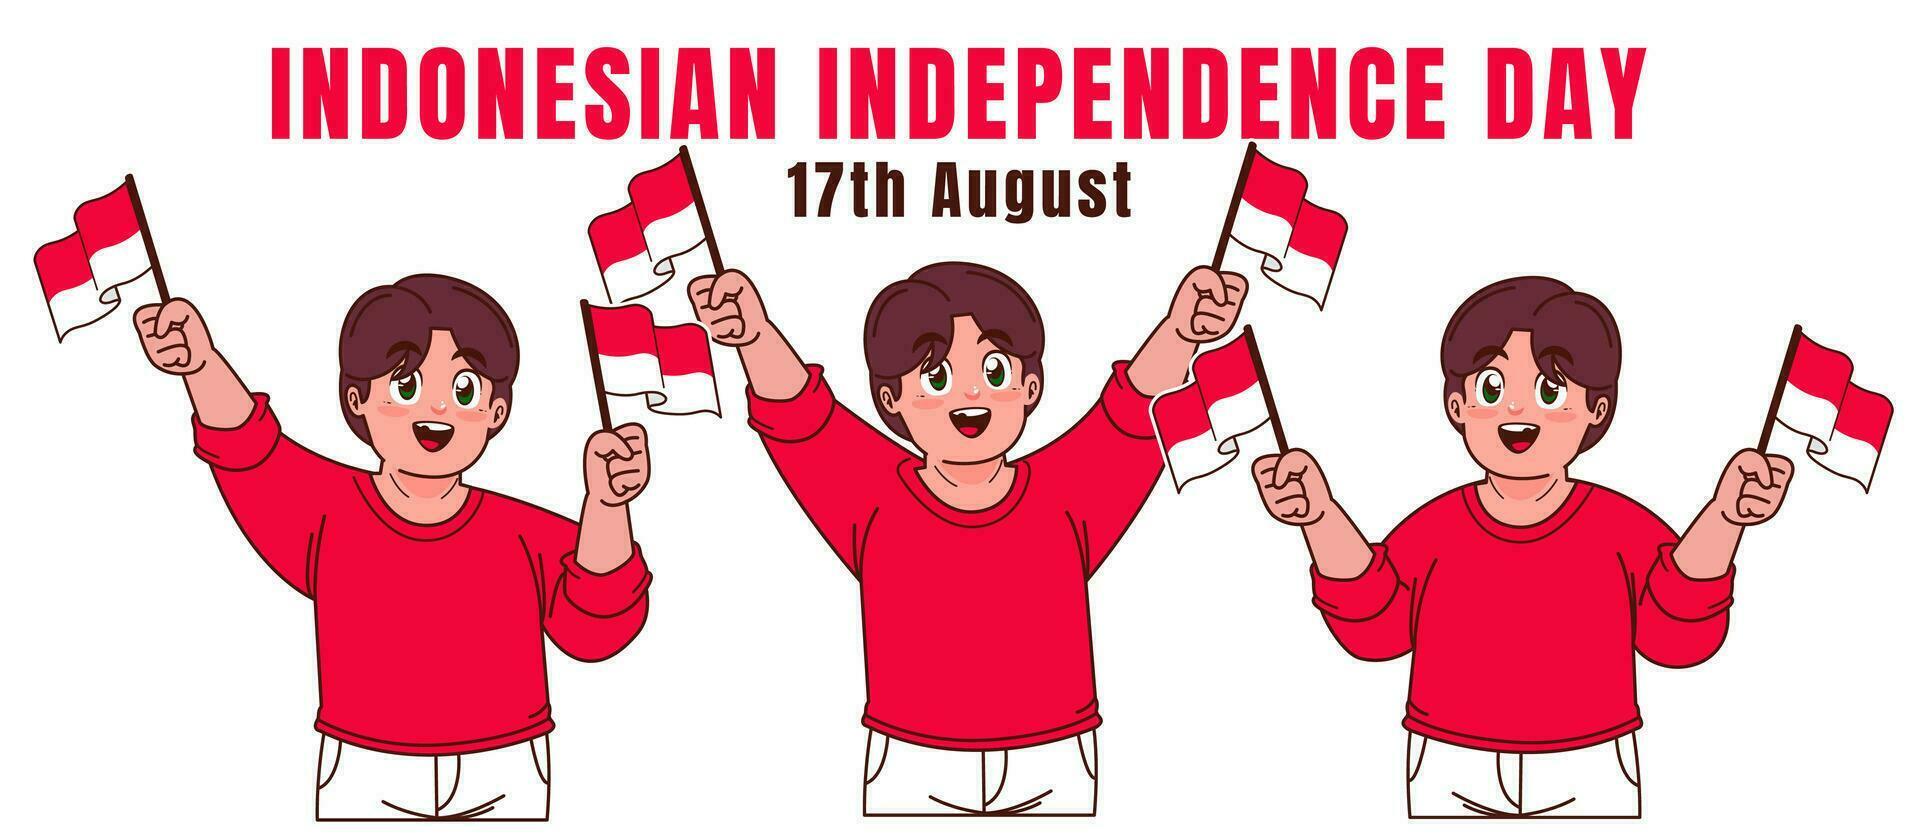 Little boy waving Indonesian flag, Indonesia independence day celebration vector